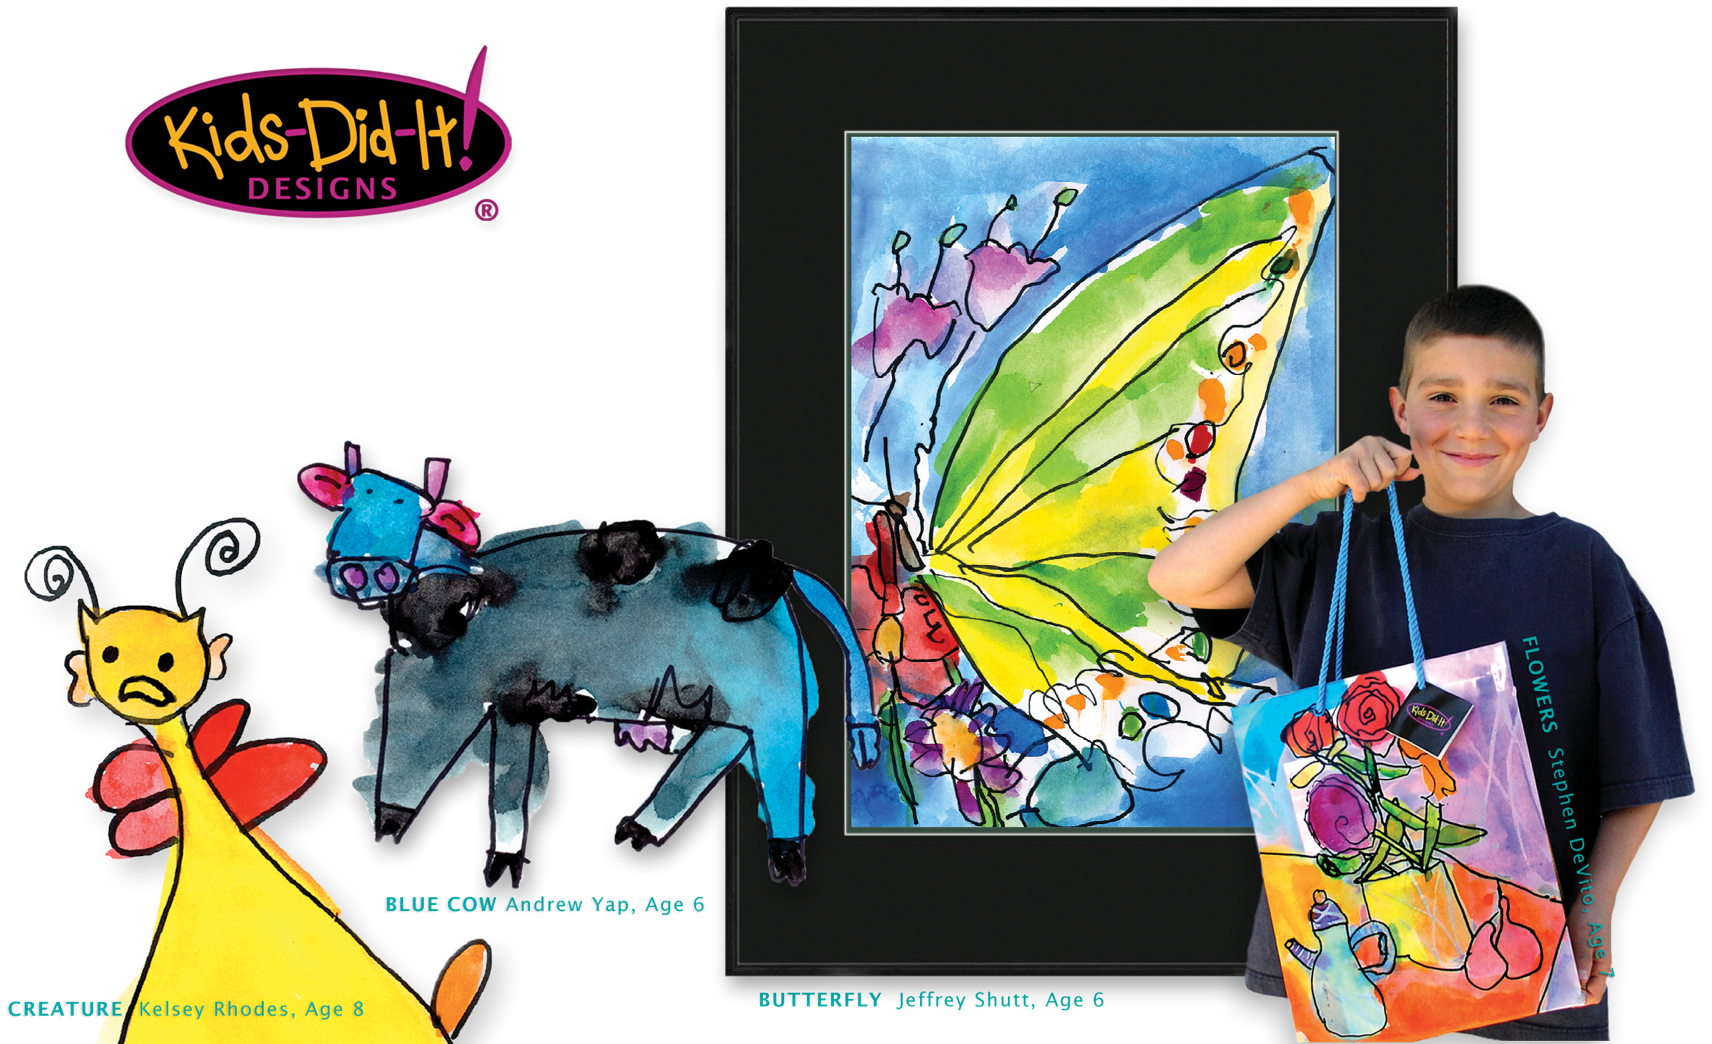 Art by kids. Children's illustrated Creature, Blue Cow with Pinnk ears and watercolor Butterfly with Stephen DeVito Age 7 holding his illustrated Flowers gift bag.